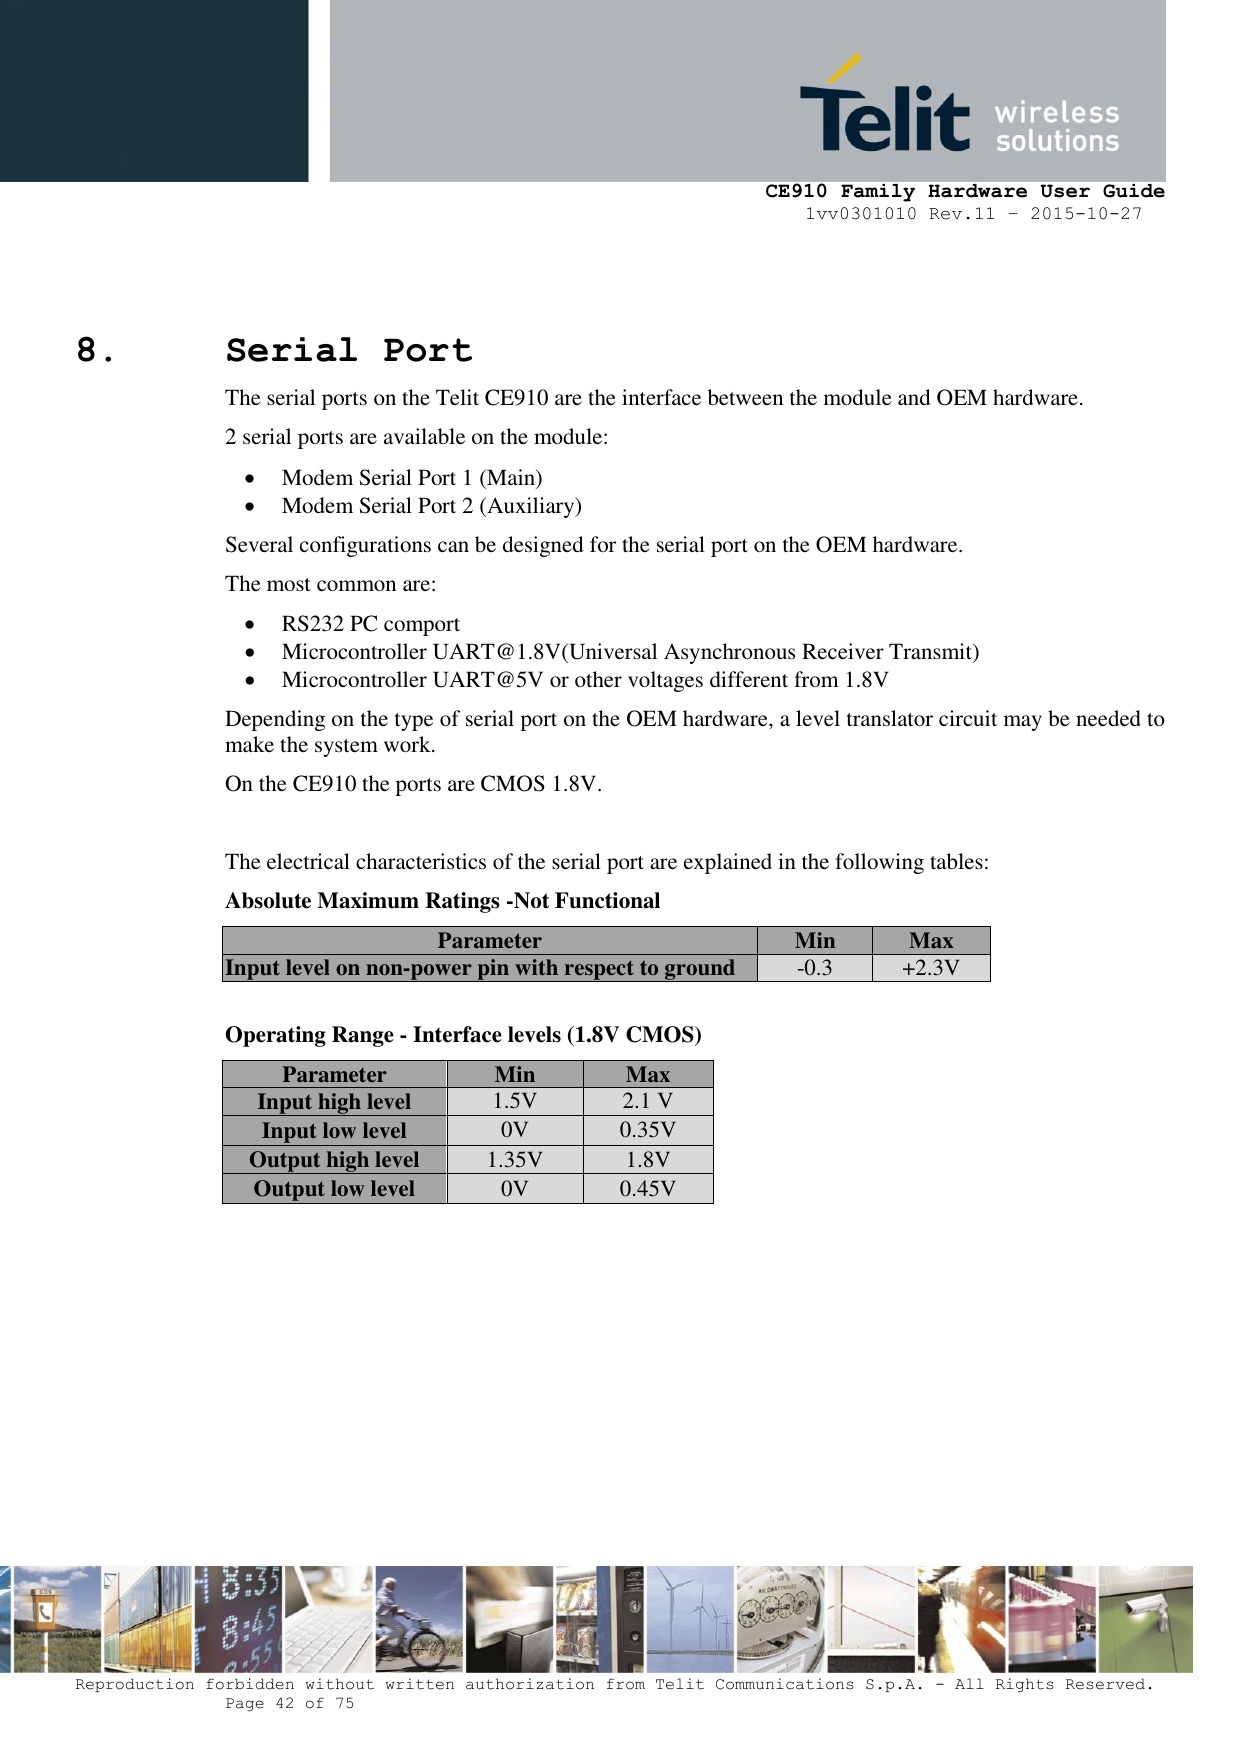     CE910 Family Hardware User Guide 1vv0301010 Rev.11 – 2015-10-27 Reproduction forbidden without written authorization from Telit Communications S.p.A. - All Rights Reserved.    Page 42 of 75                                                     8. Serial Port The serial ports on the Telit CE910 are the interface between the module and OEM hardware.  2 serial ports are available on the module:  Modem Serial Port 1 (Main)  Modem Serial Port 2 (Auxiliary) Several configurations can be designed for the serial port on the OEM hardware.  The most common are:  RS232 PC comport  Microcontroller UART@1.8V(Universal Asynchronous Receiver Transmit)  Microcontroller UART@5V or other voltages different from 1.8V Depending on the type of serial port on the OEM hardware, a level translator circuit may be needed to make the system work.  On the CE910 the ports are CMOS 1.8V.   The electrical characteristics of the serial port are explained in the following tables: Absolute Maximum Ratings -Not Functional Parameter Min Max Input level on non-power pin with respect to ground -0.3 +2.3V  Operating Range - Interface levels (1.8V CMOS) Parameter Min Max Input high level 1.5V 2.1 V Input low level 0V 0.35V Output high level 1.35V 1.8V Output low level 0V 0.45V  